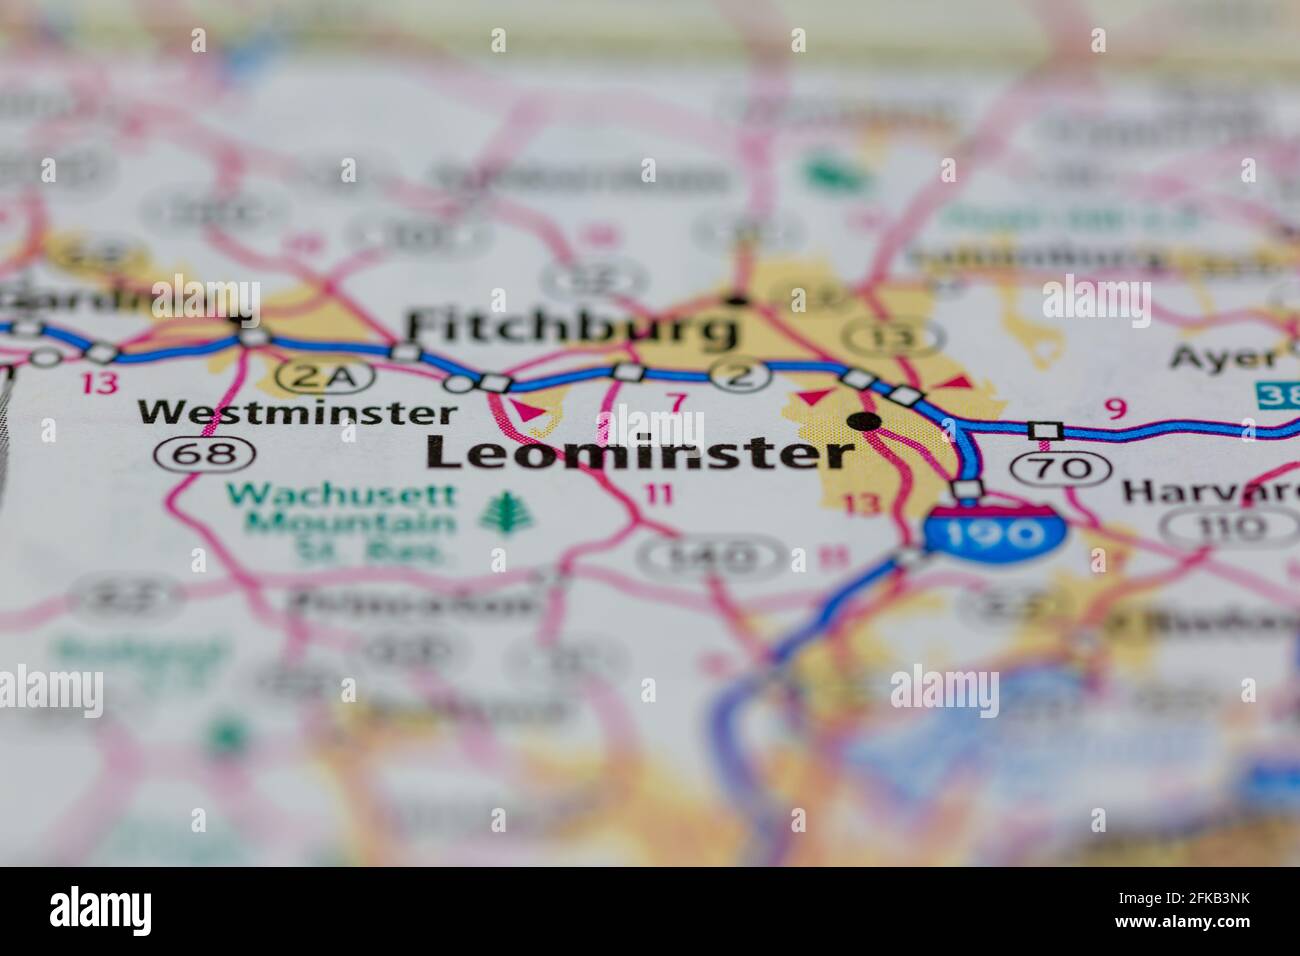 Leominster Massachusetts USA Shown on a Geography map or road map Stock Photo